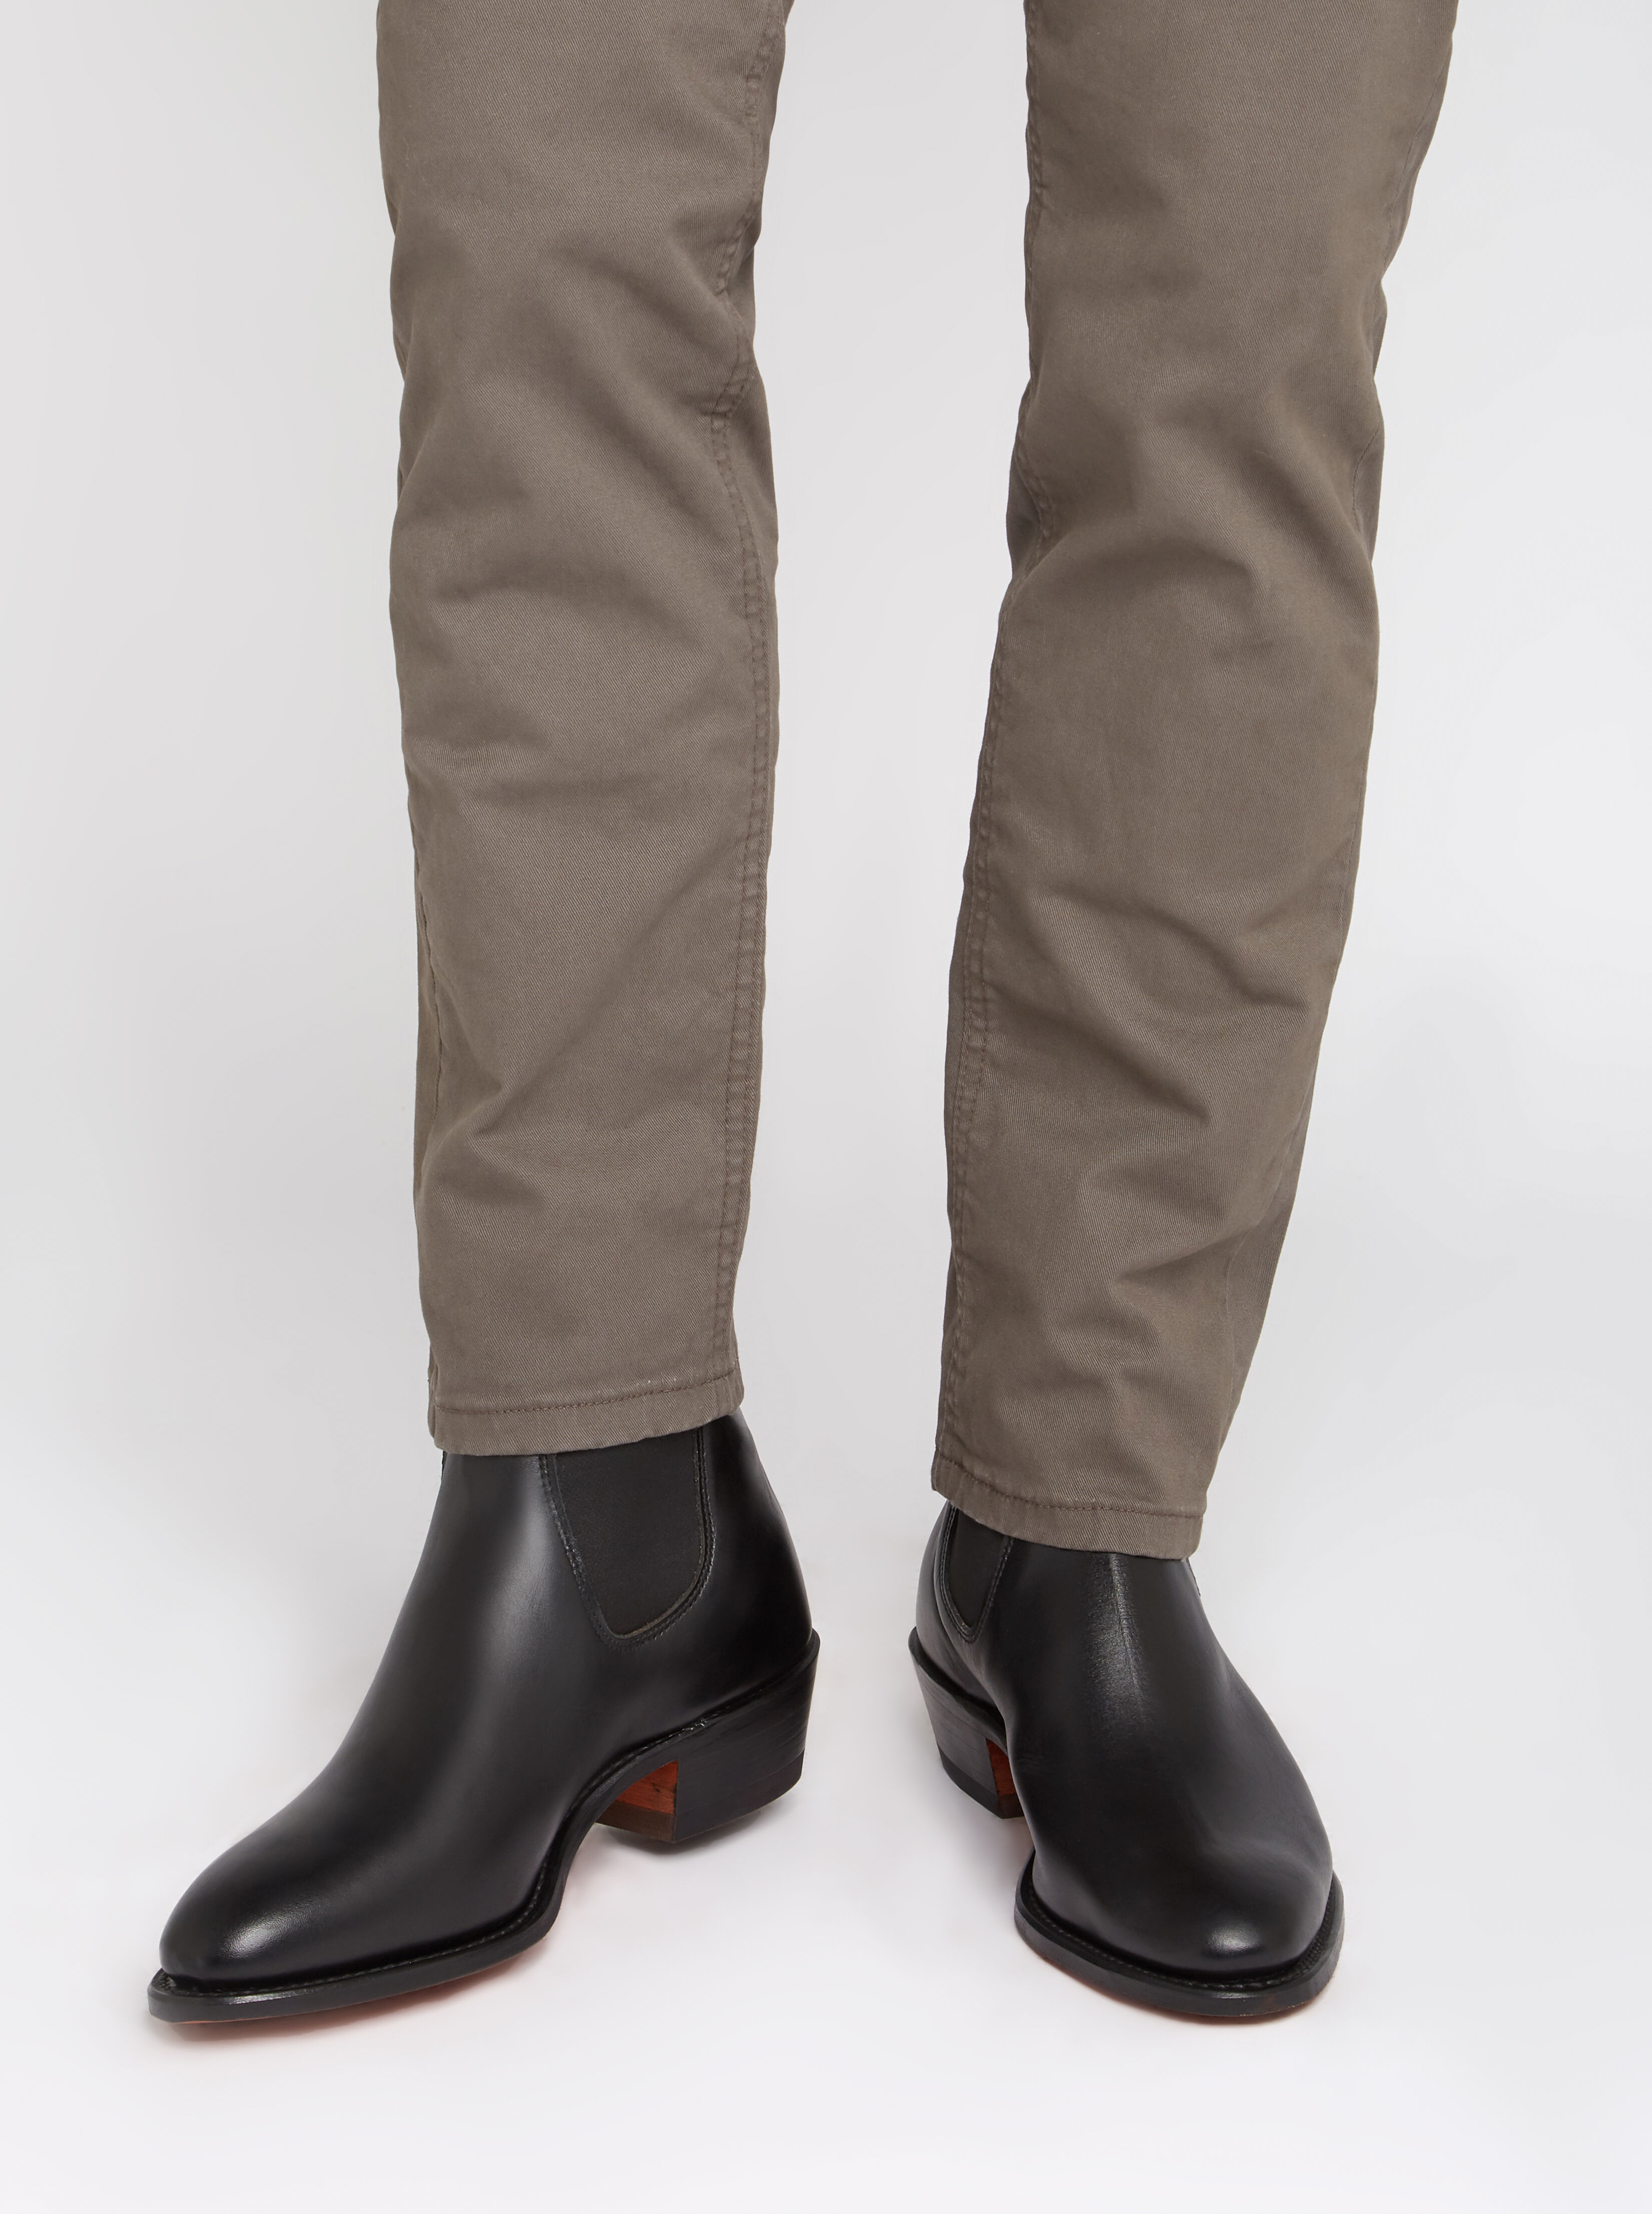 rm williams knee high boots